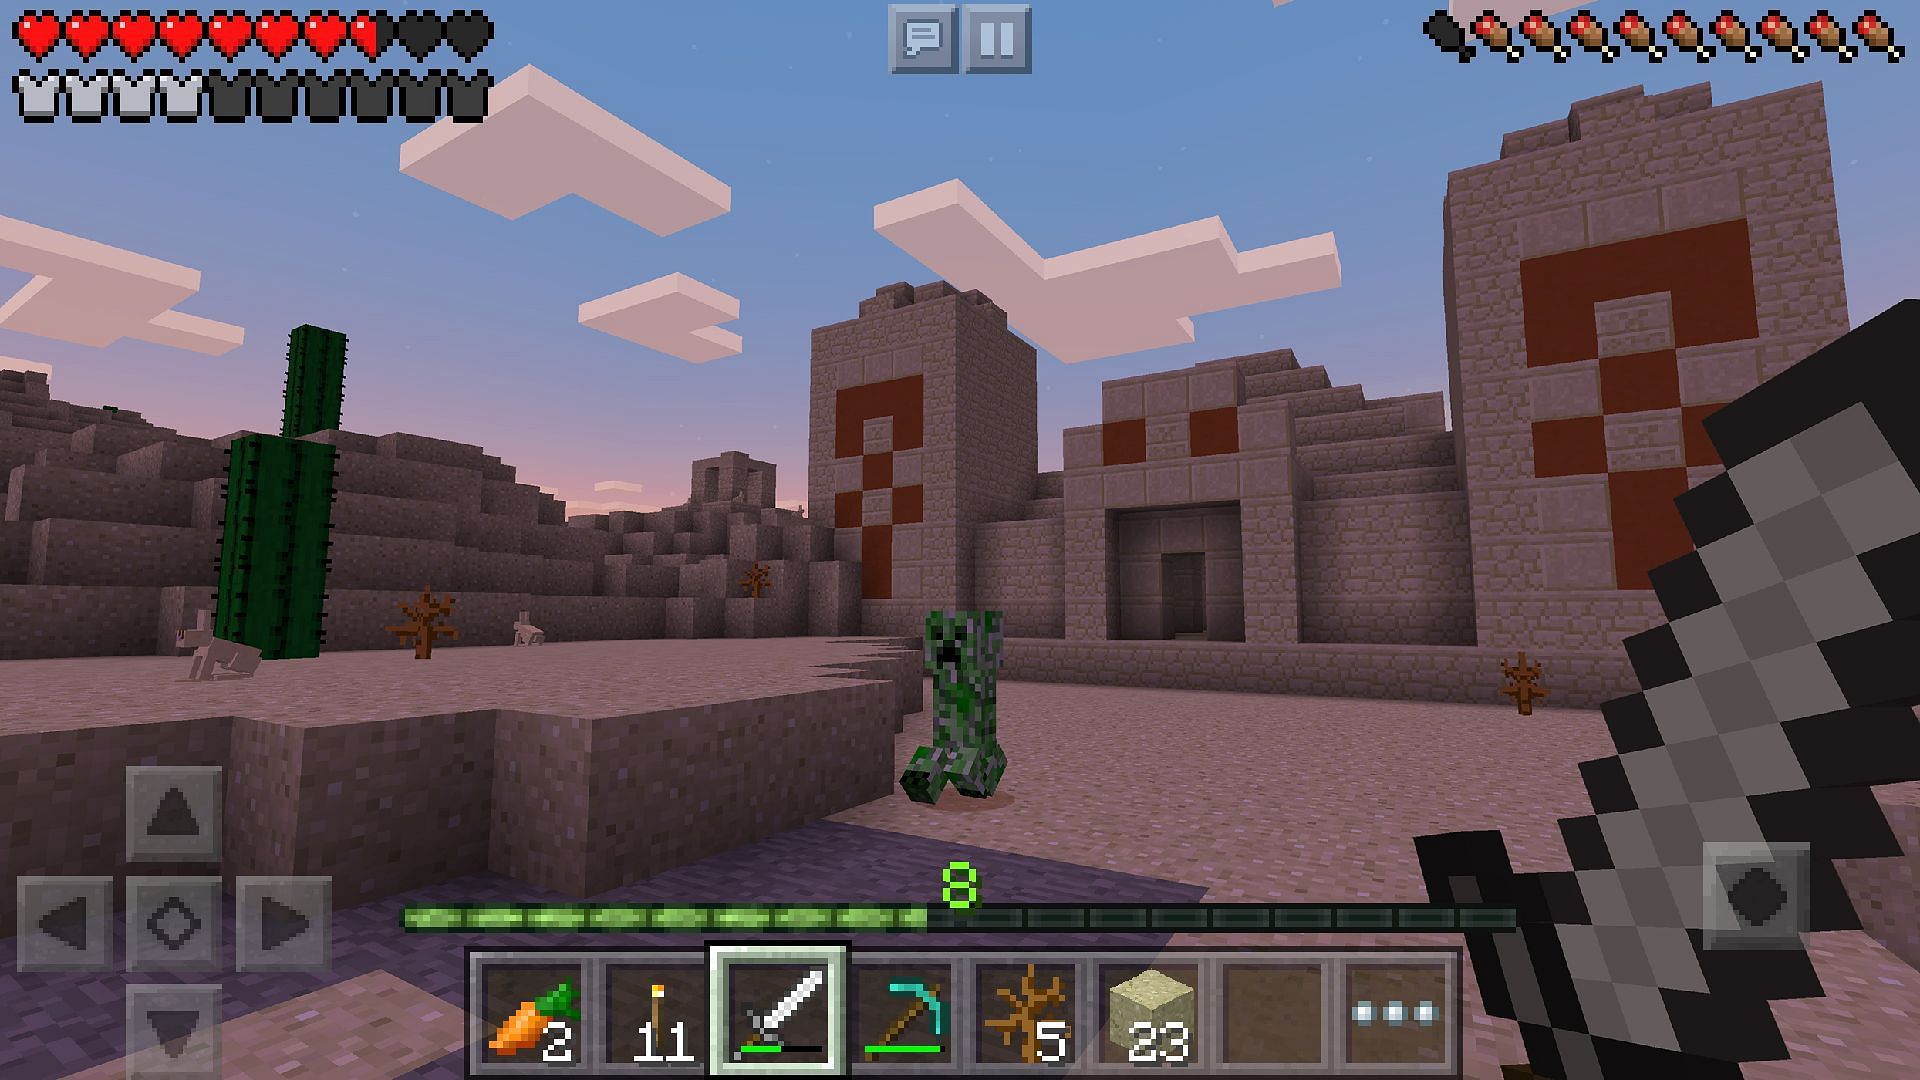 Mobile phones handle Minecraft Previews differently based on operating systems (Image via Mojang)